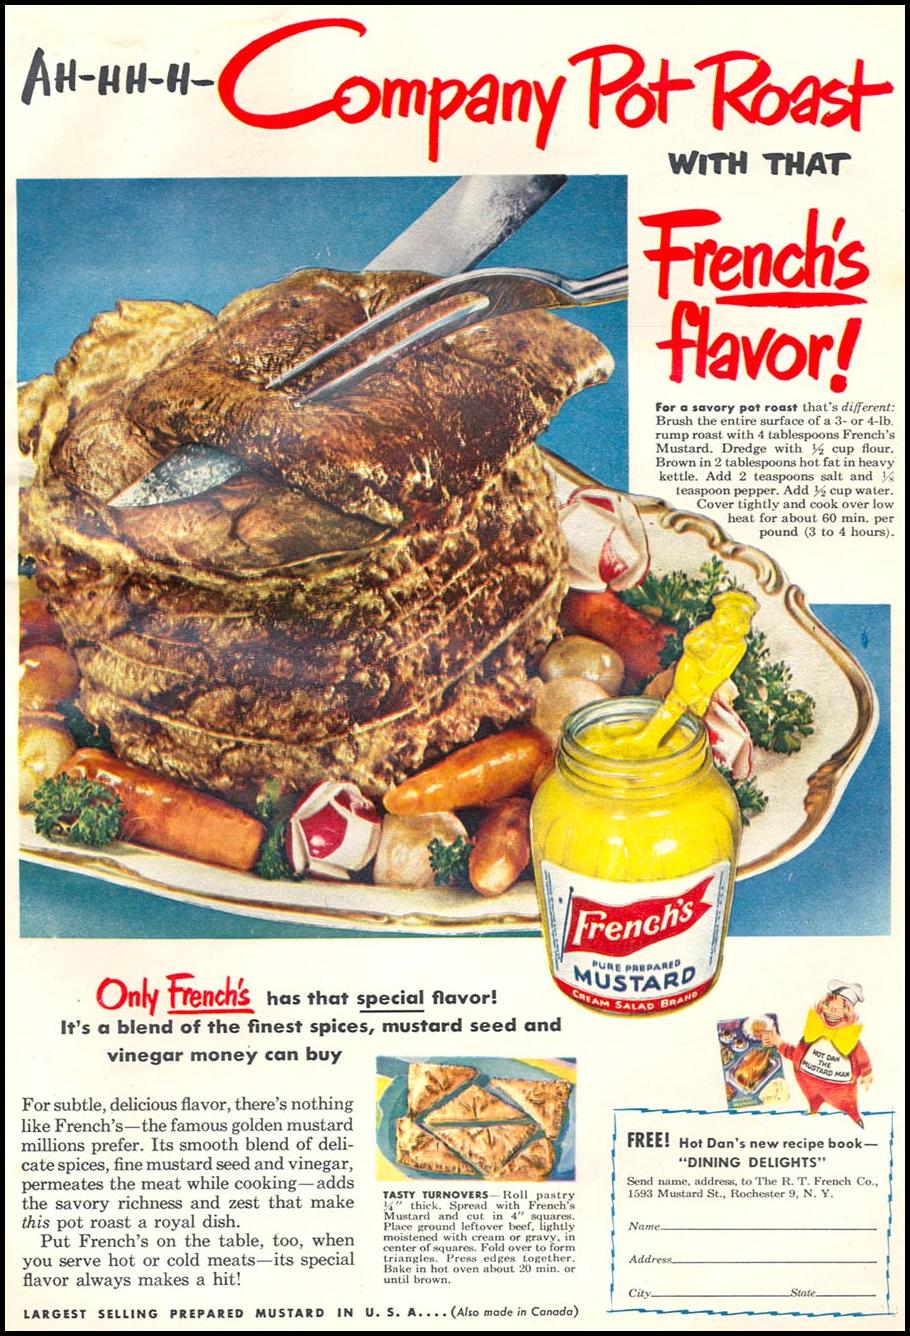 FRENCH'S PREPARED MUSTARD
WOMAN'S DAY
06/01/1950
p. 75